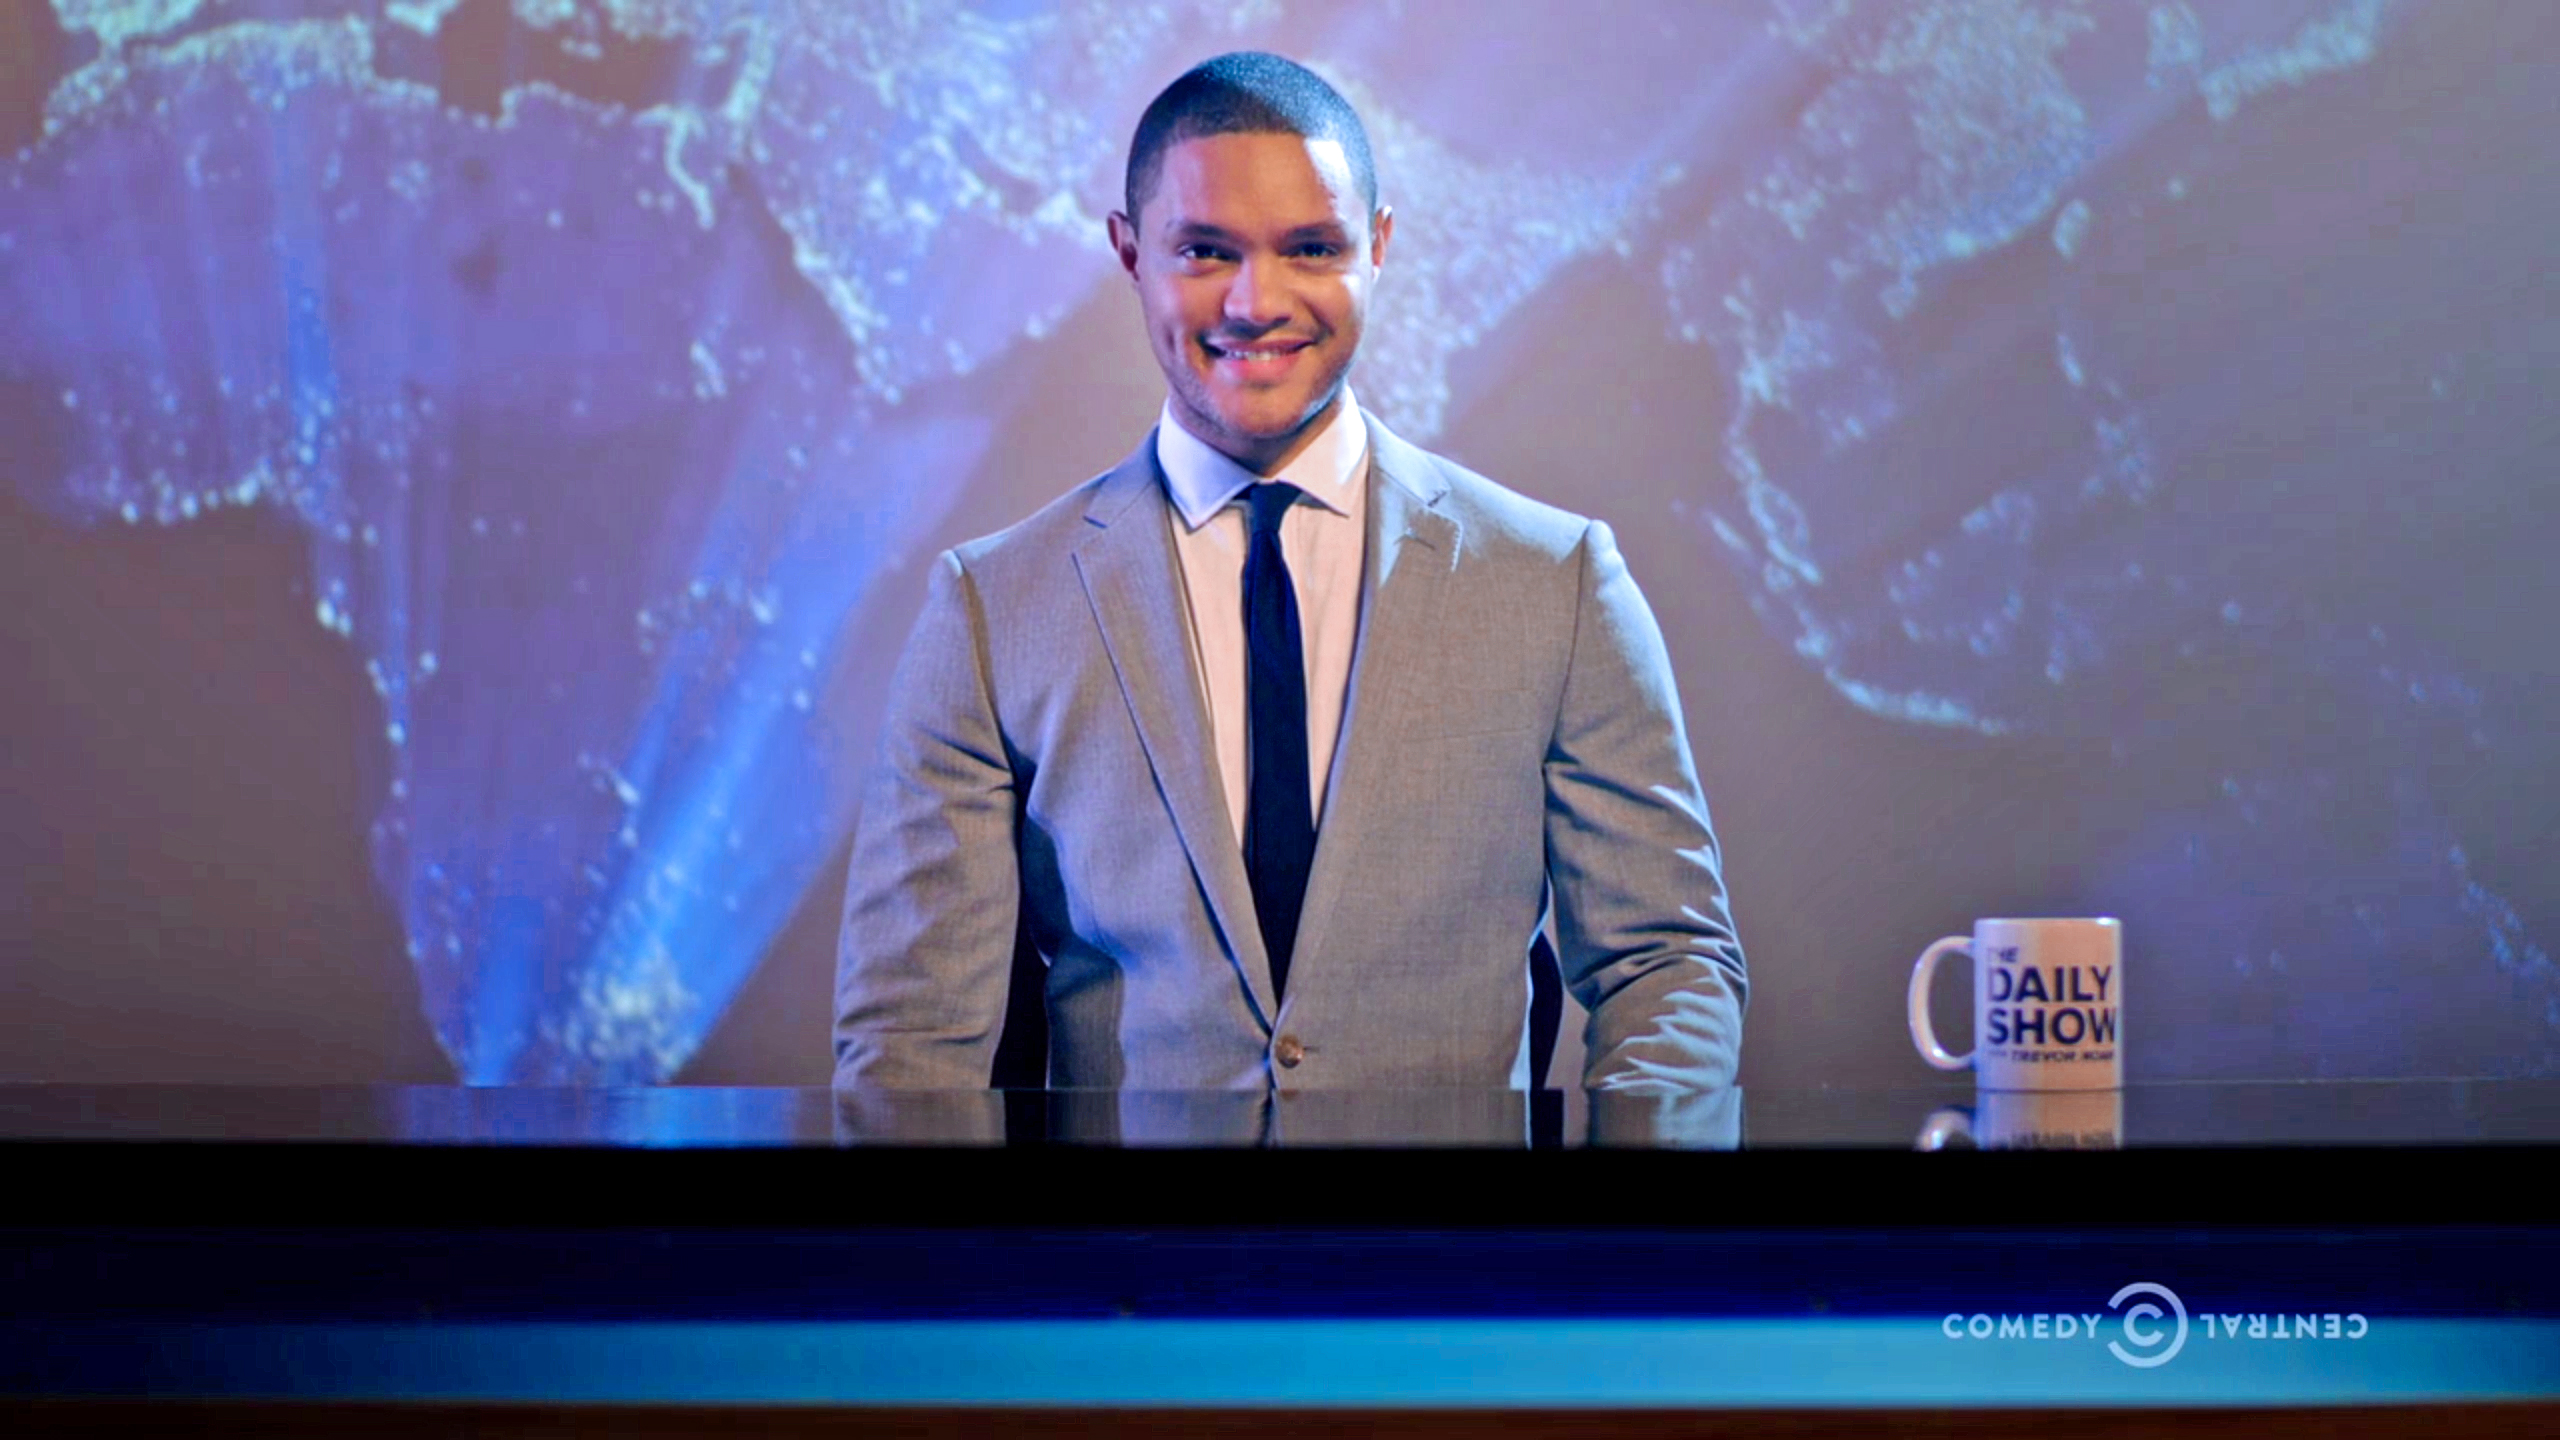 Trevor Noah's Daily Show: What to expect